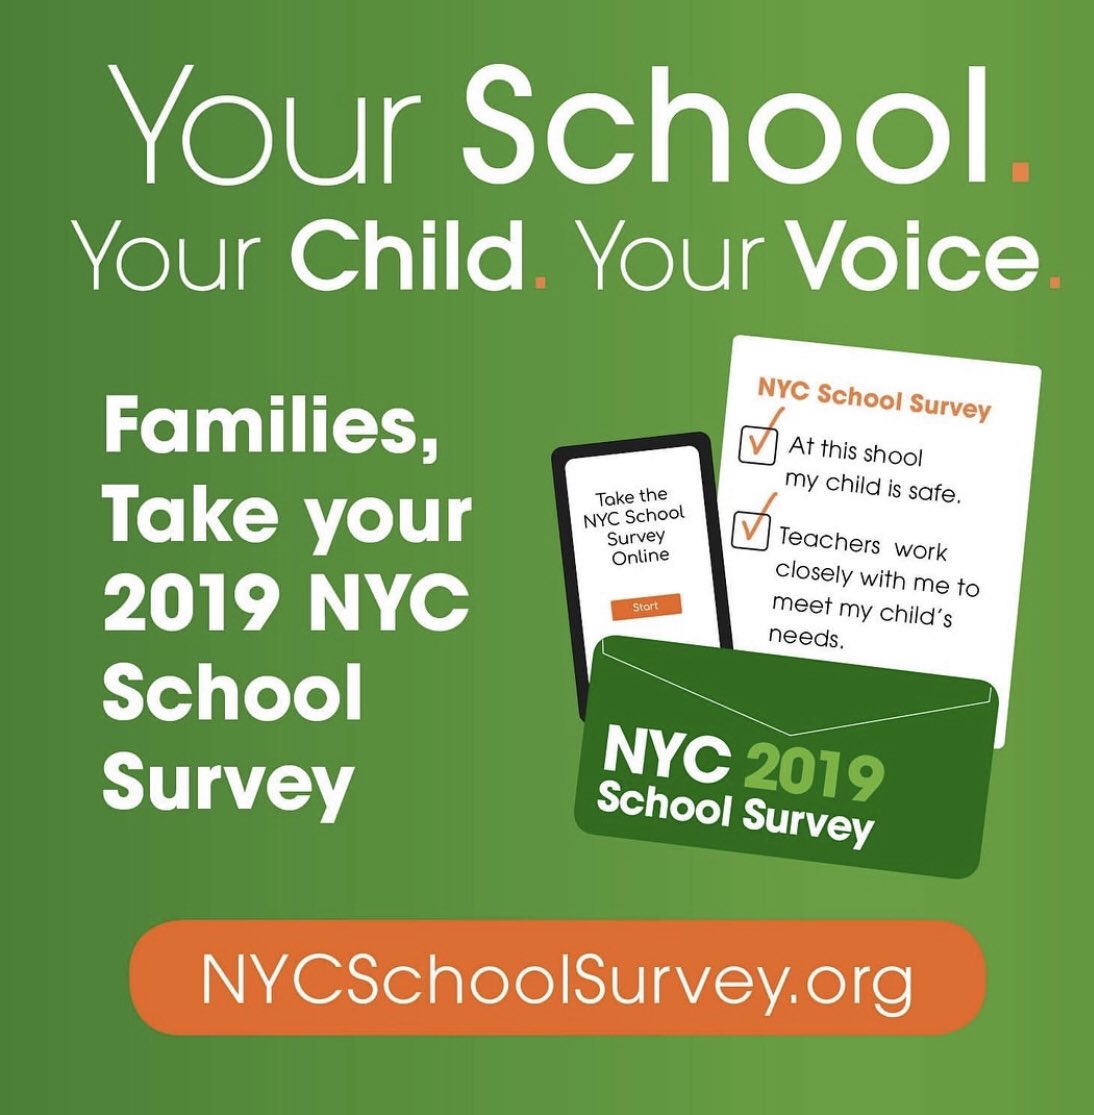 NYC School Surveys are now available online, in multiple languages!  Due April 3rd. Your School, Your Child, Your Voice #NYCSchoolSurvey